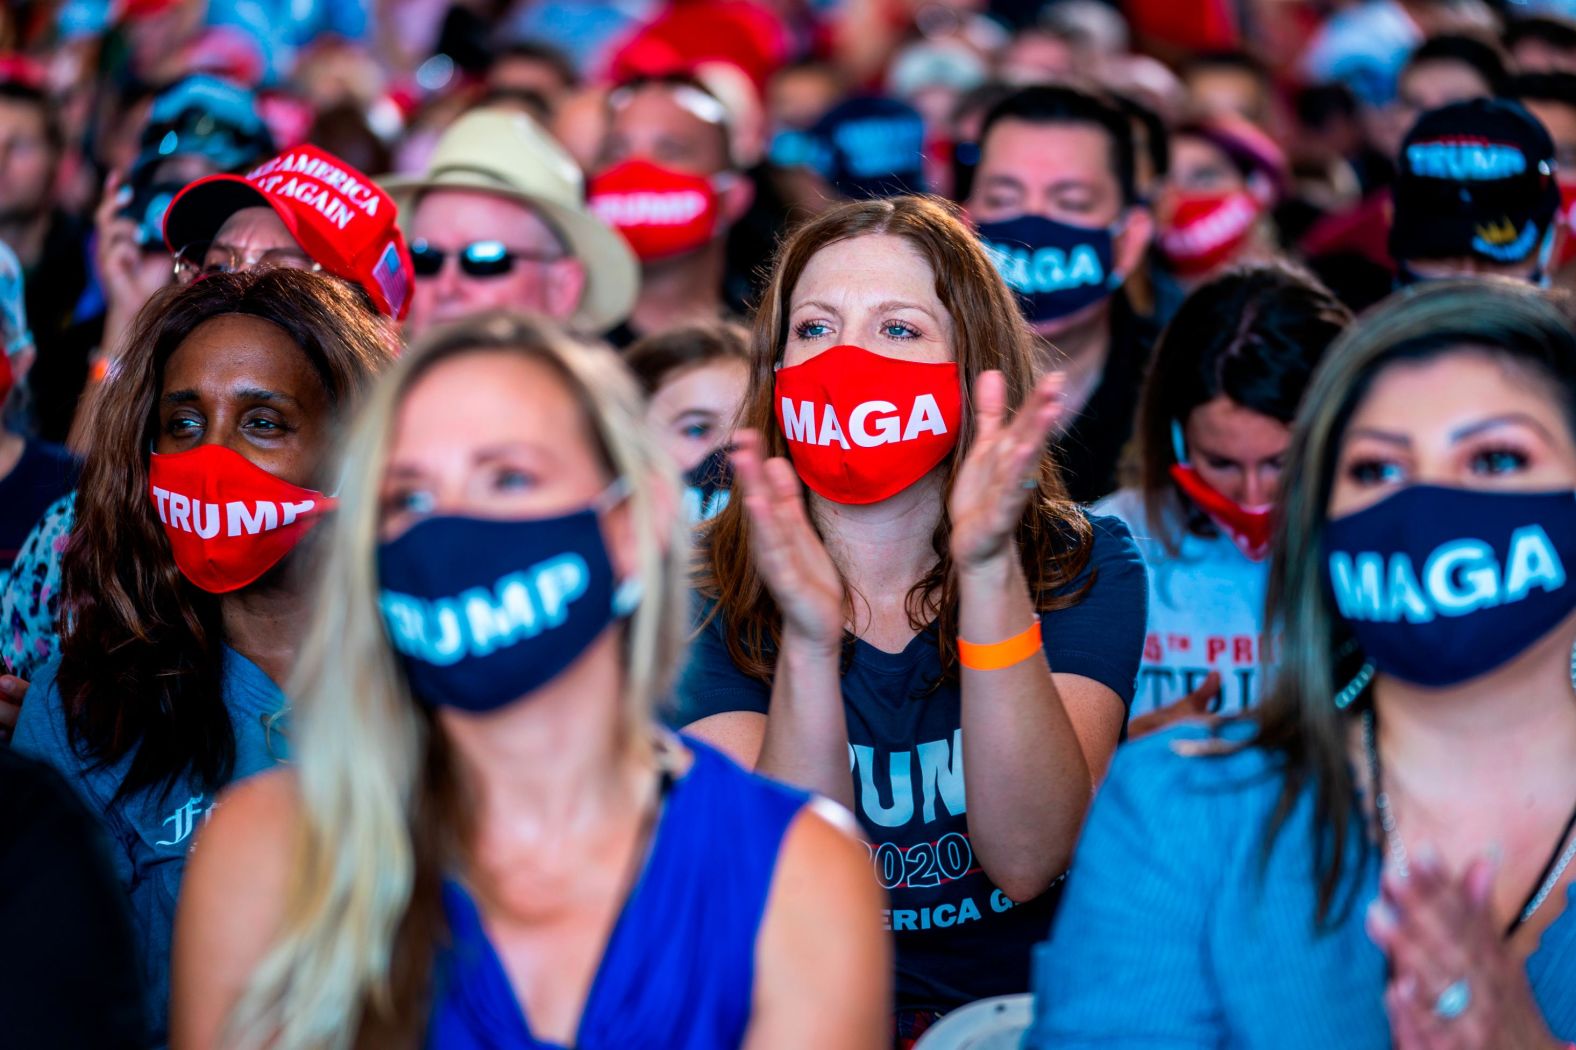 Trump supporters attend a rally in Yuma, Arizona, on August 18. The President delivered a <a href="index.php?page=&url=https%3A%2F%2Fwww.cnn.com%2F2020%2F08%2F18%2Fpolitics%2Fdonald-trump-yuma-arizona-border-patrol-endorsement%2Findex.html" target="_blank">wide-ranging speech</a> to a crowd with little to no physical distancing.